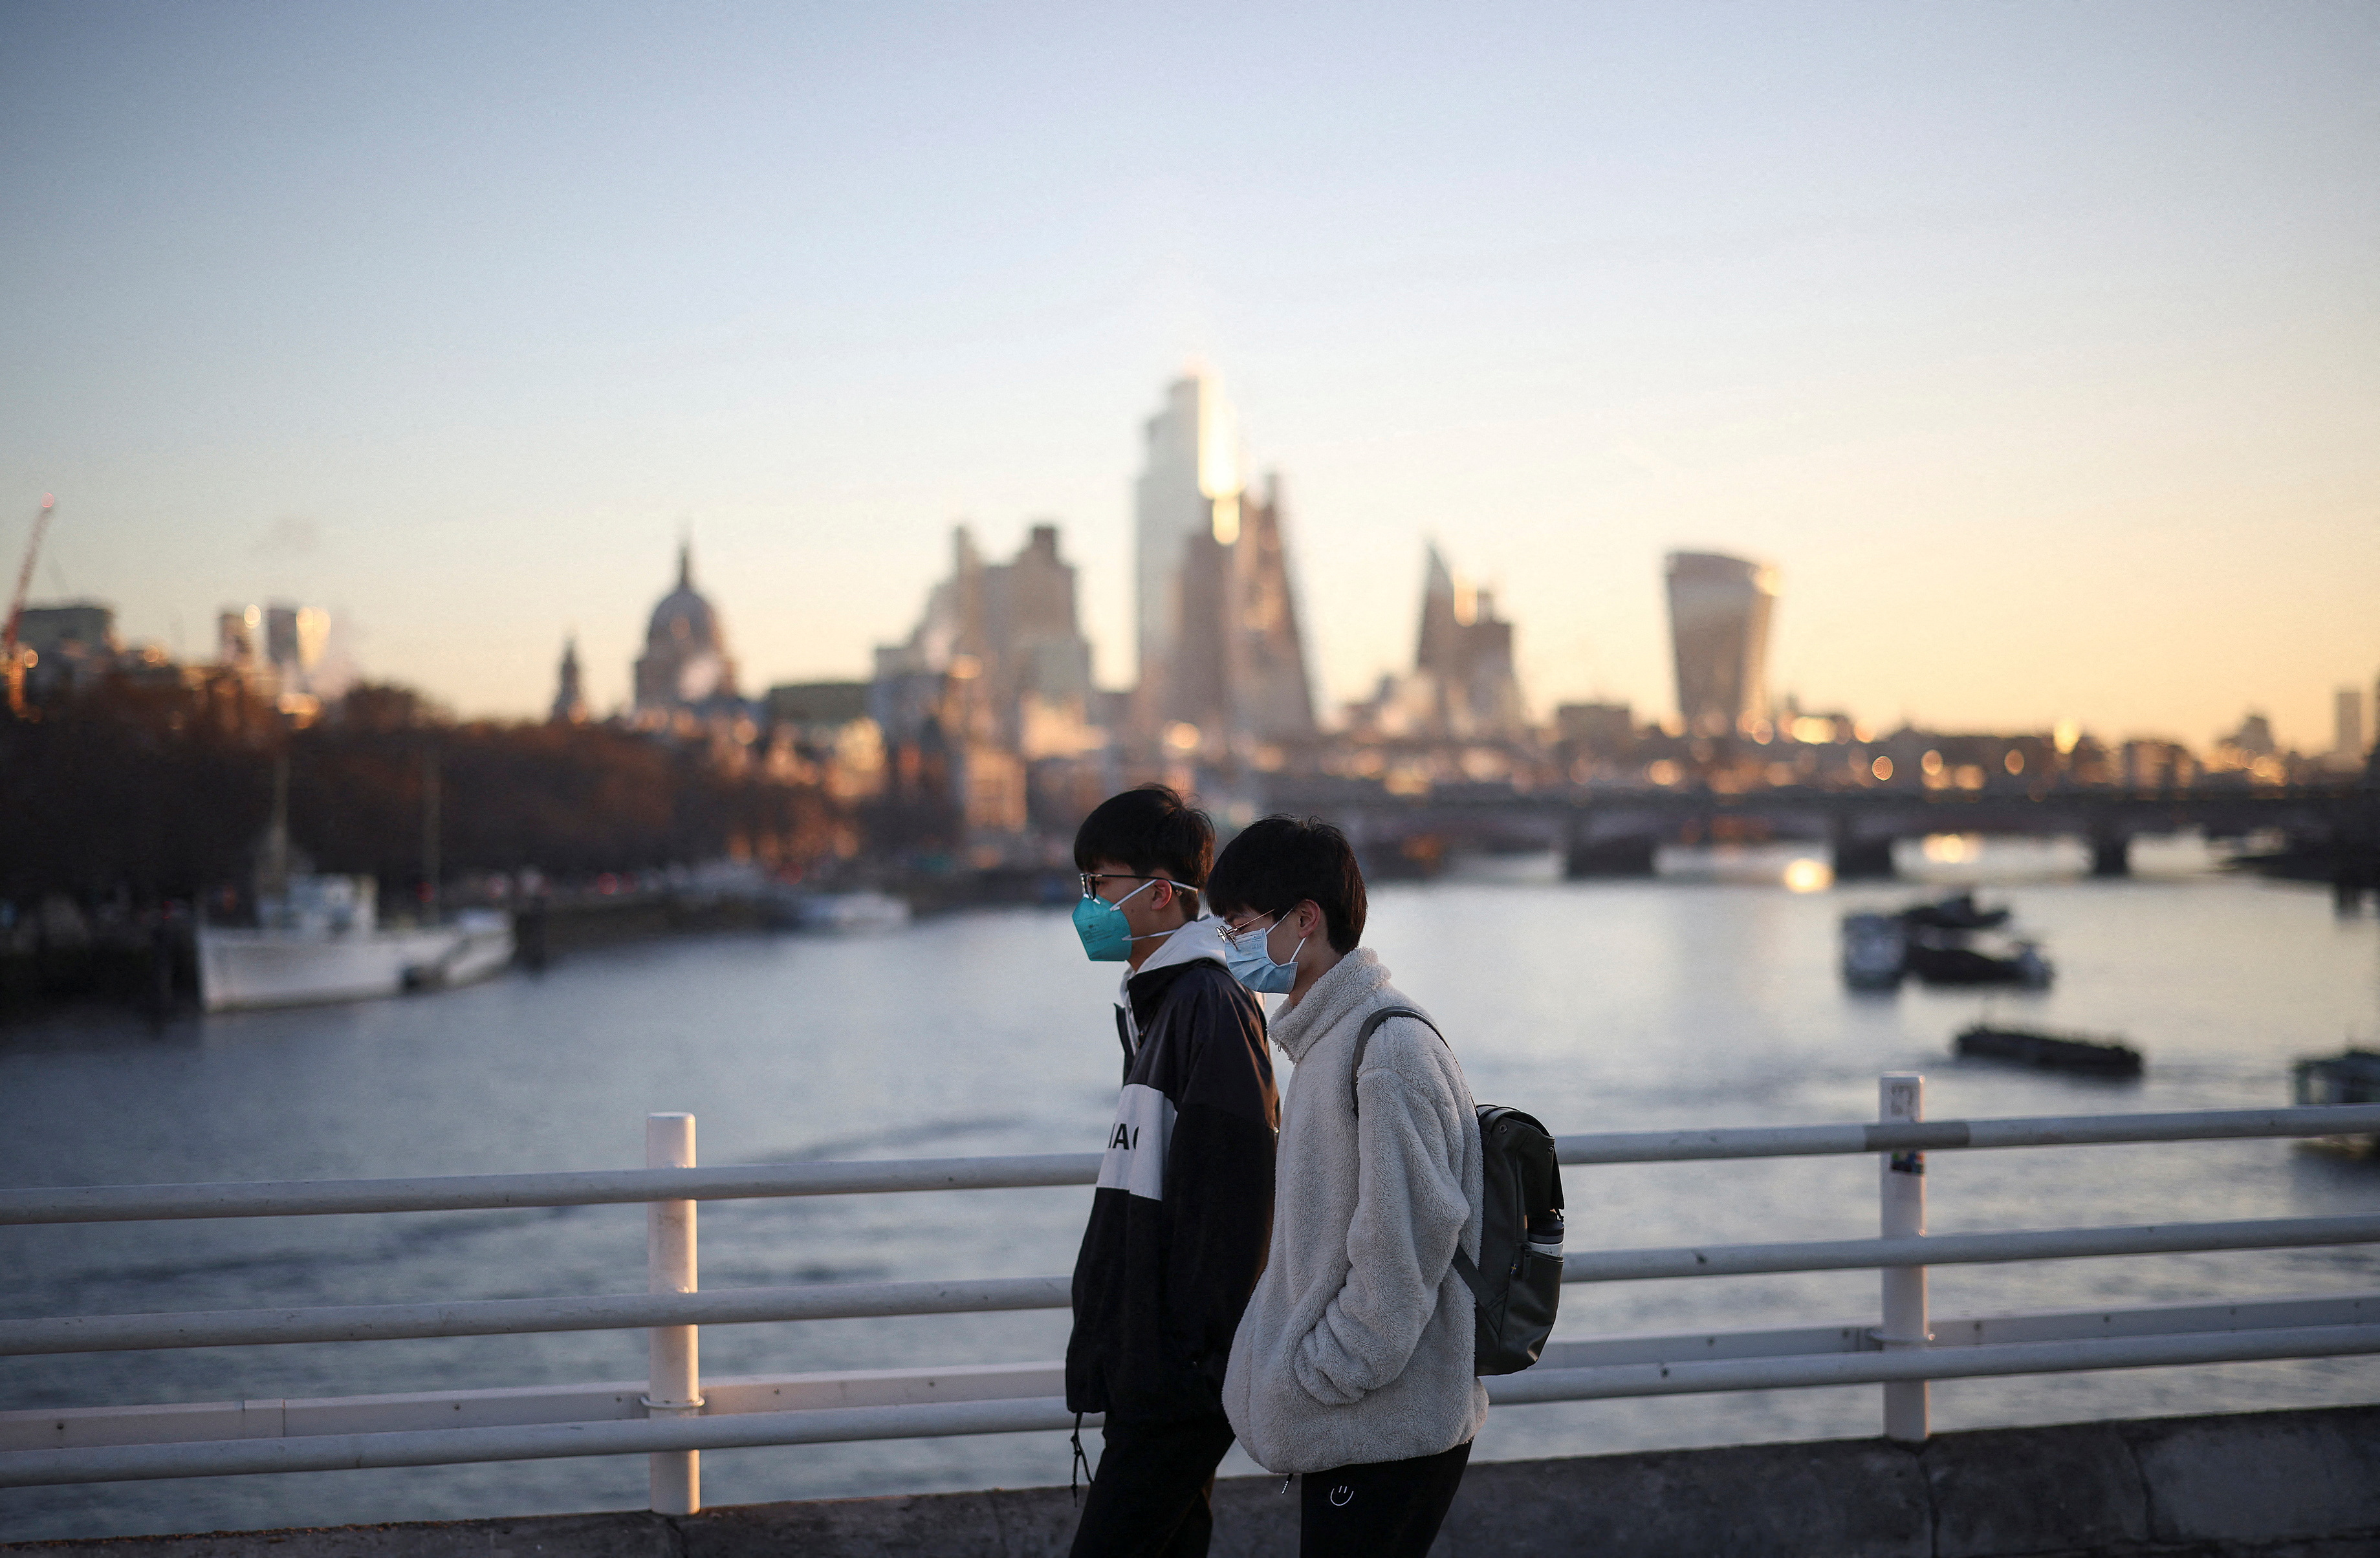 People wearing protective face masks walk over Waterloo Bridge during morning rush hour, amid the ongoing coronavirus disease (COVID-19) pandemic in London